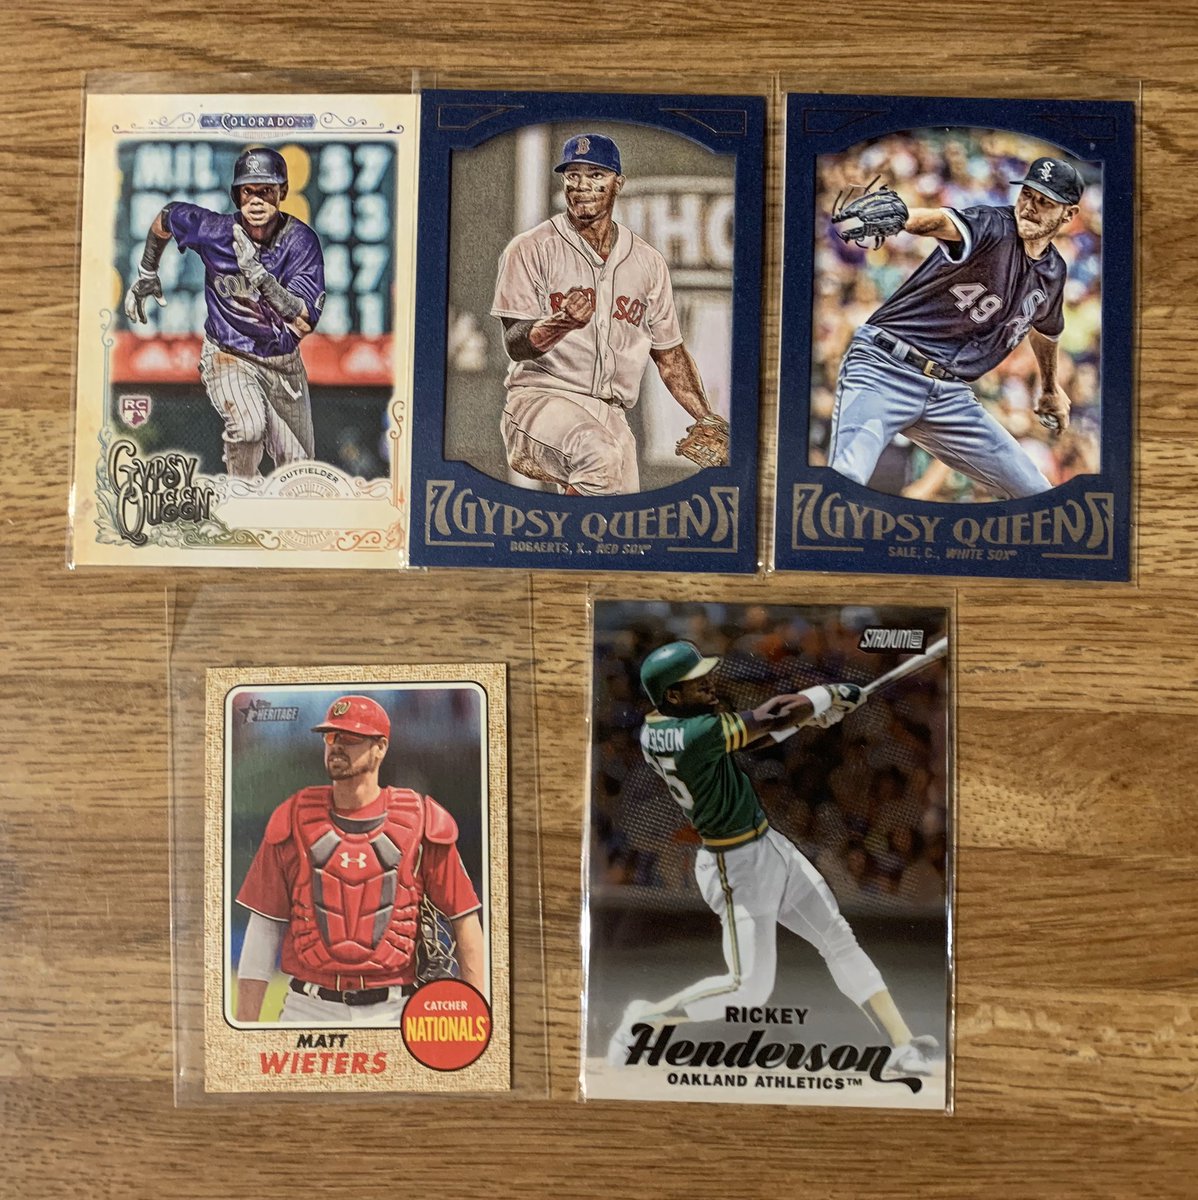 Post 44 - $.50 each  @HobbyConnector see pinned tweet for shippingTapia - No nameplate variationWeiters - /100 mini